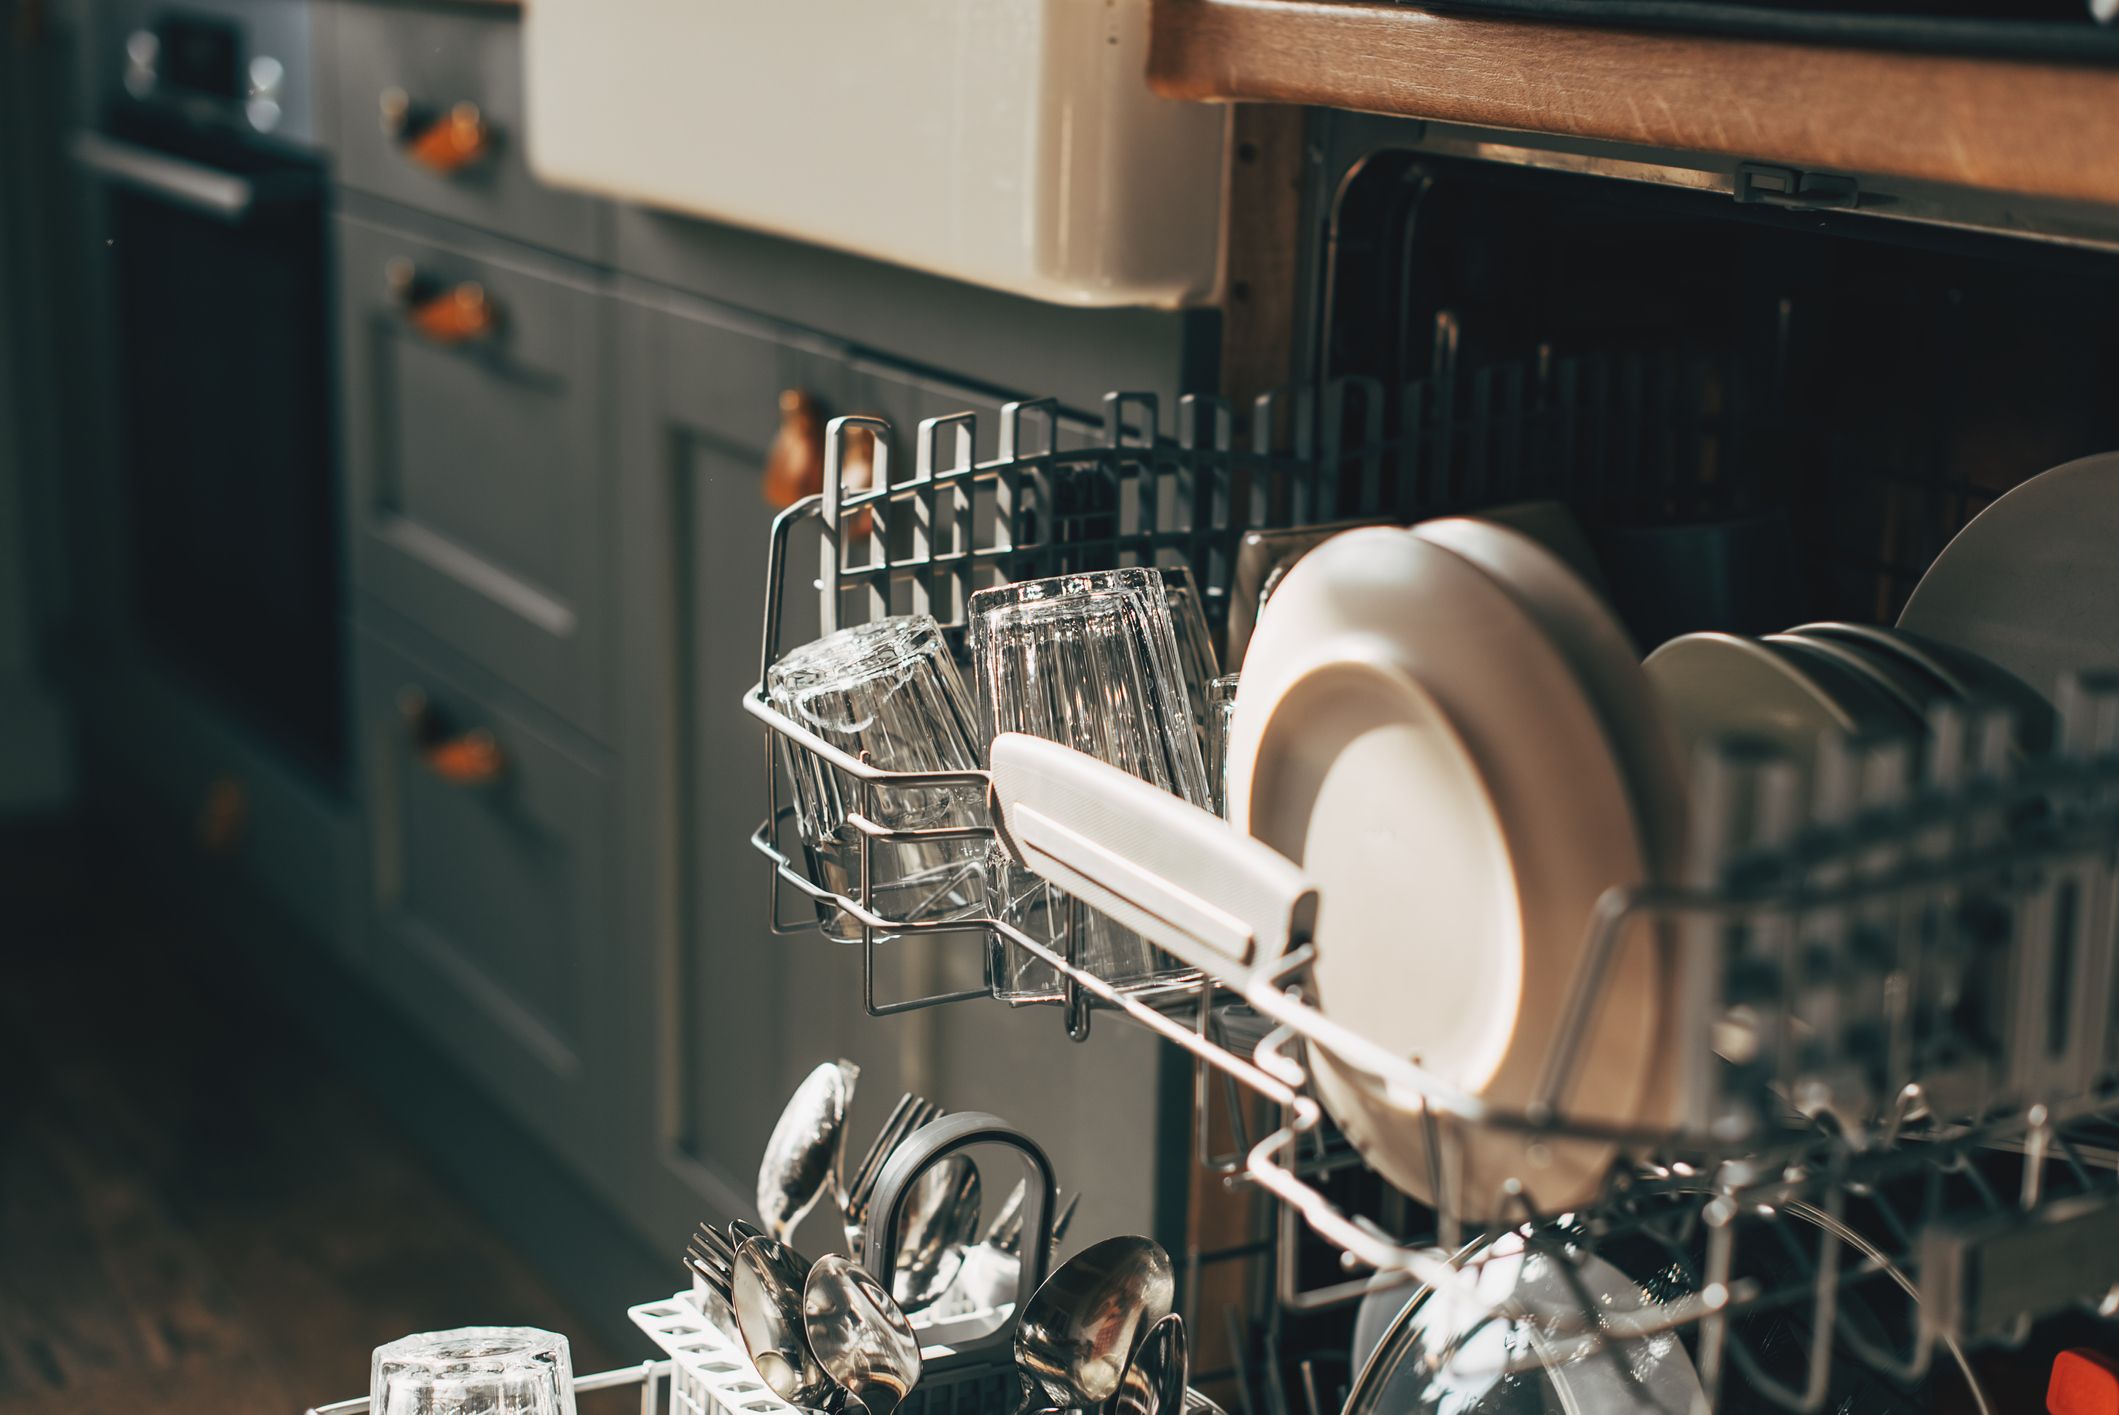 https://hips.hearstapps.com/hmg-prod/images/open-dishwasher-with-clean-utensils-in-it-royalty-free-image-1700077040.jpg